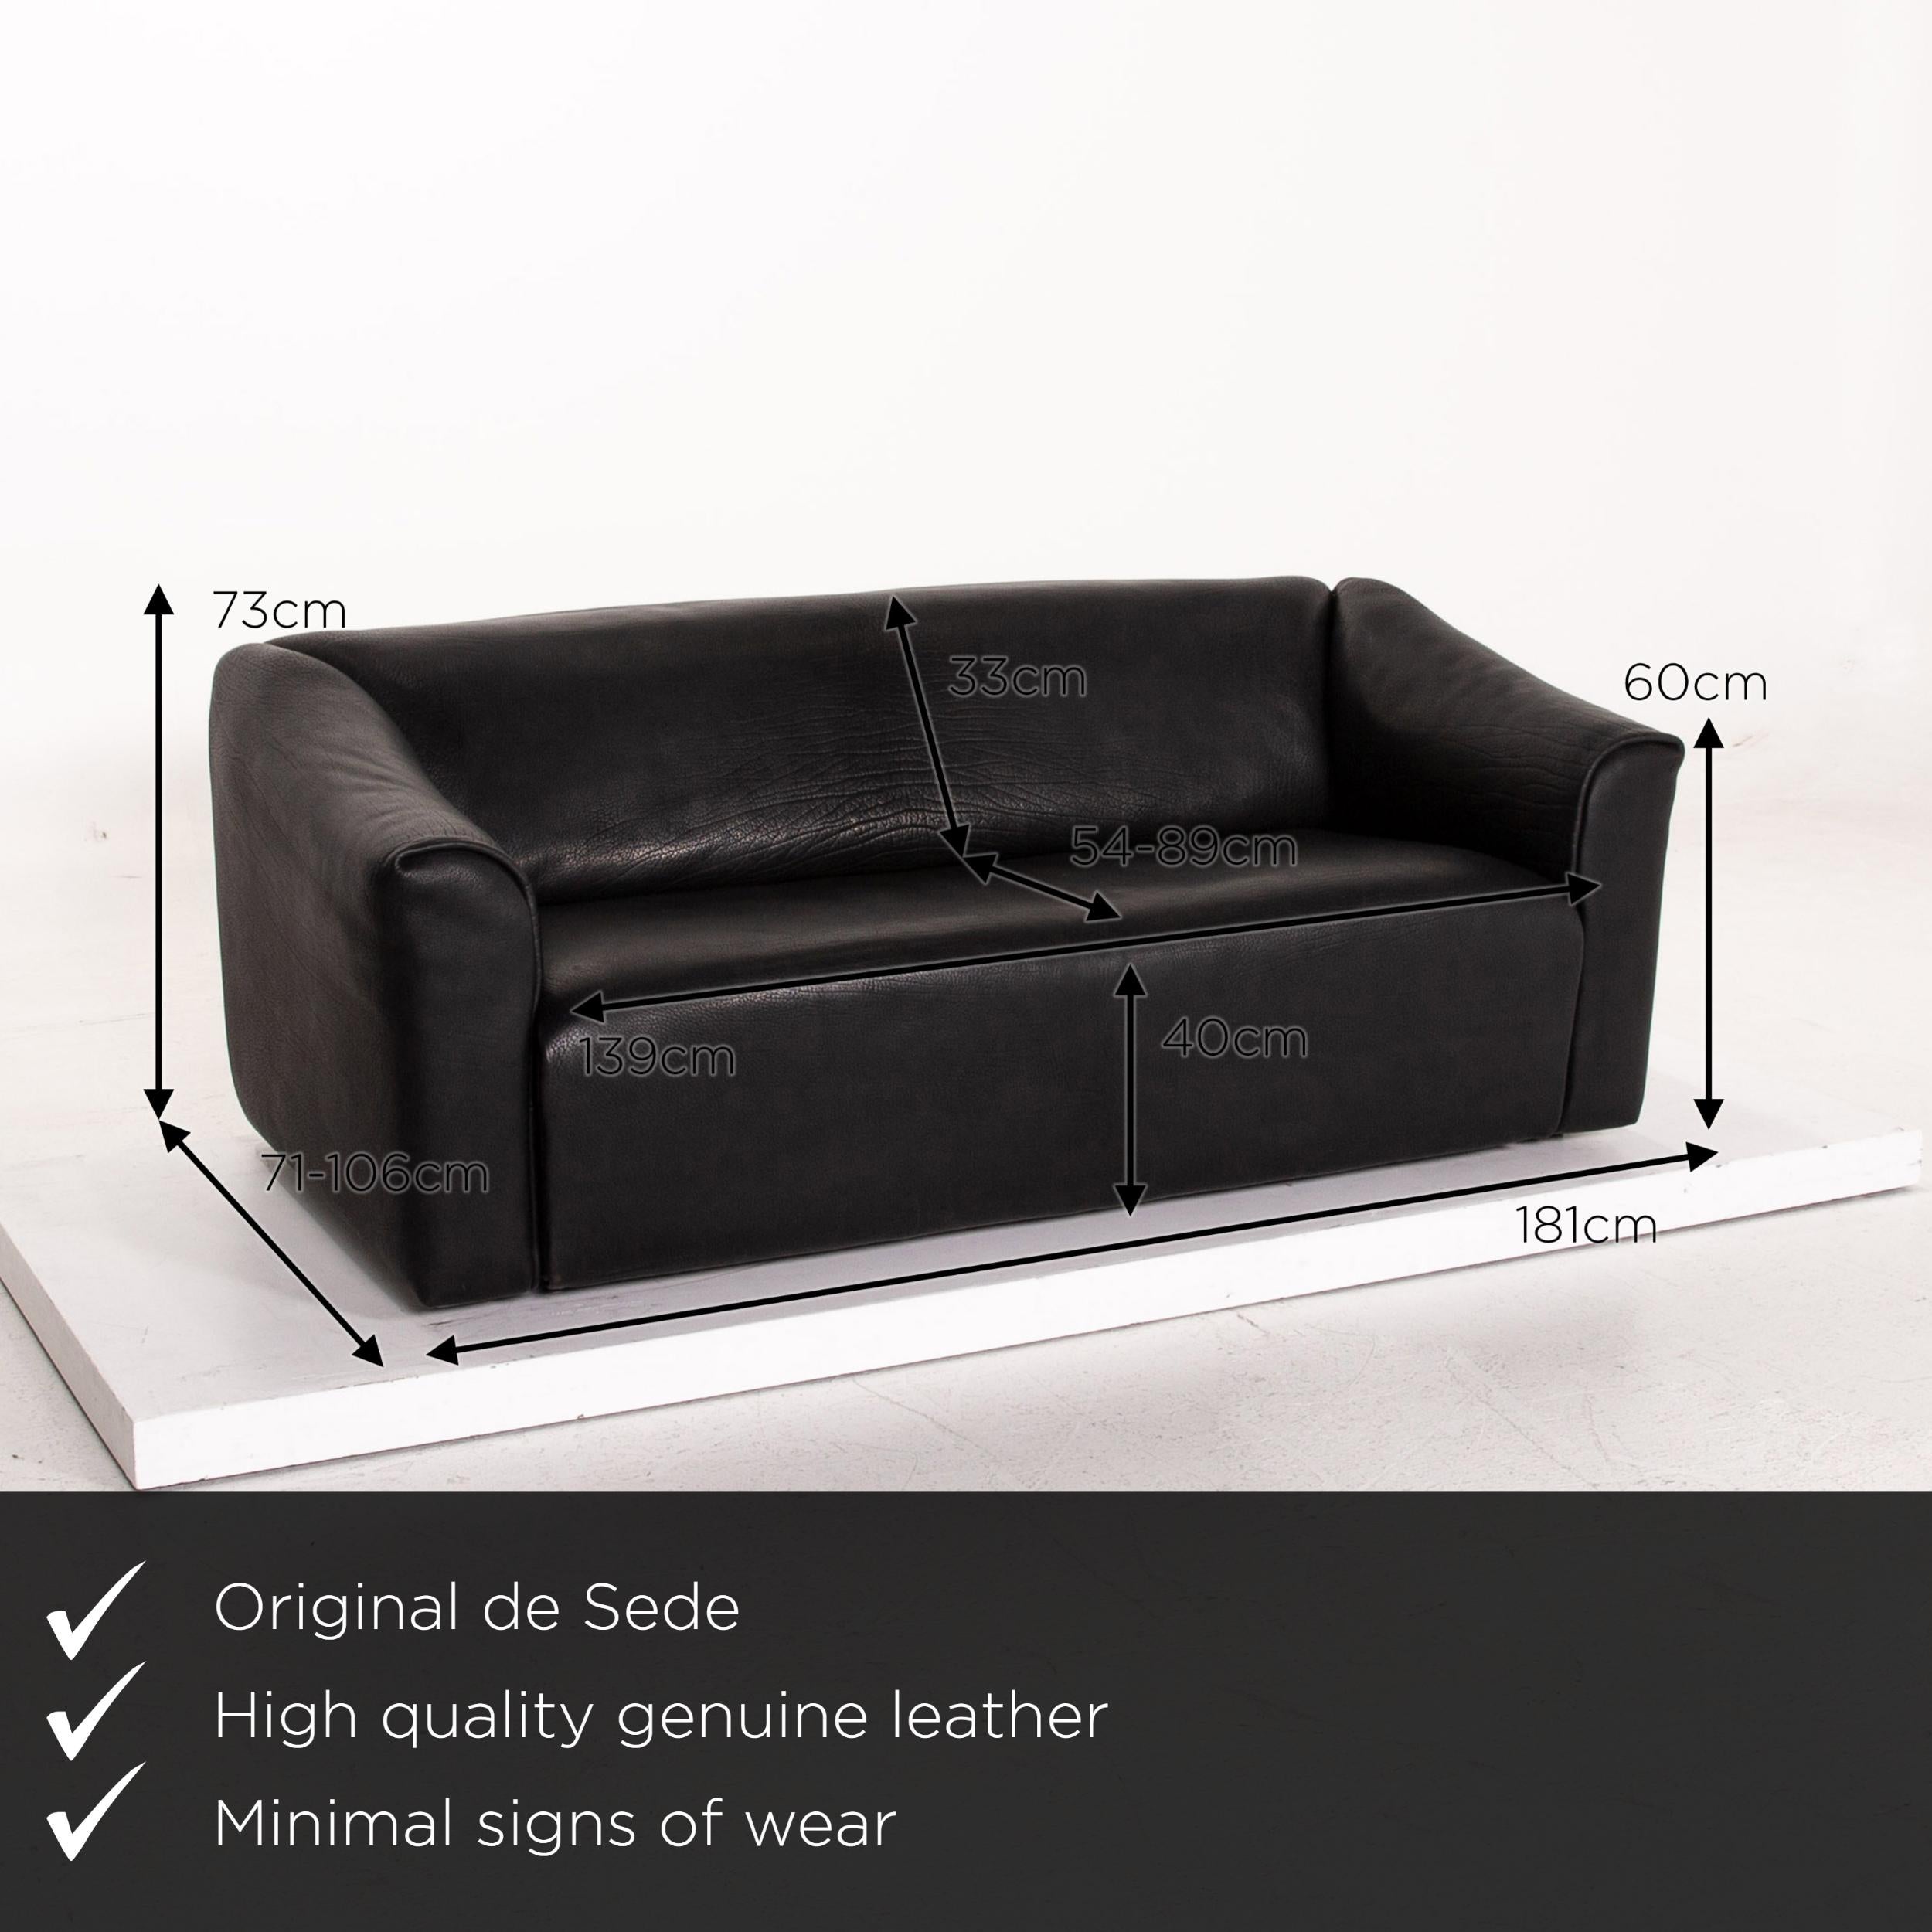 We present to you a De Sede DS 47 leather sofa black three-seat couch.
 

 Product measurements in centimeters:
 

Depth 71
Width 181
Height 73
Seat height 40
Rest height 60
Seat depth 54
Seat width 139
Back height 33.
 